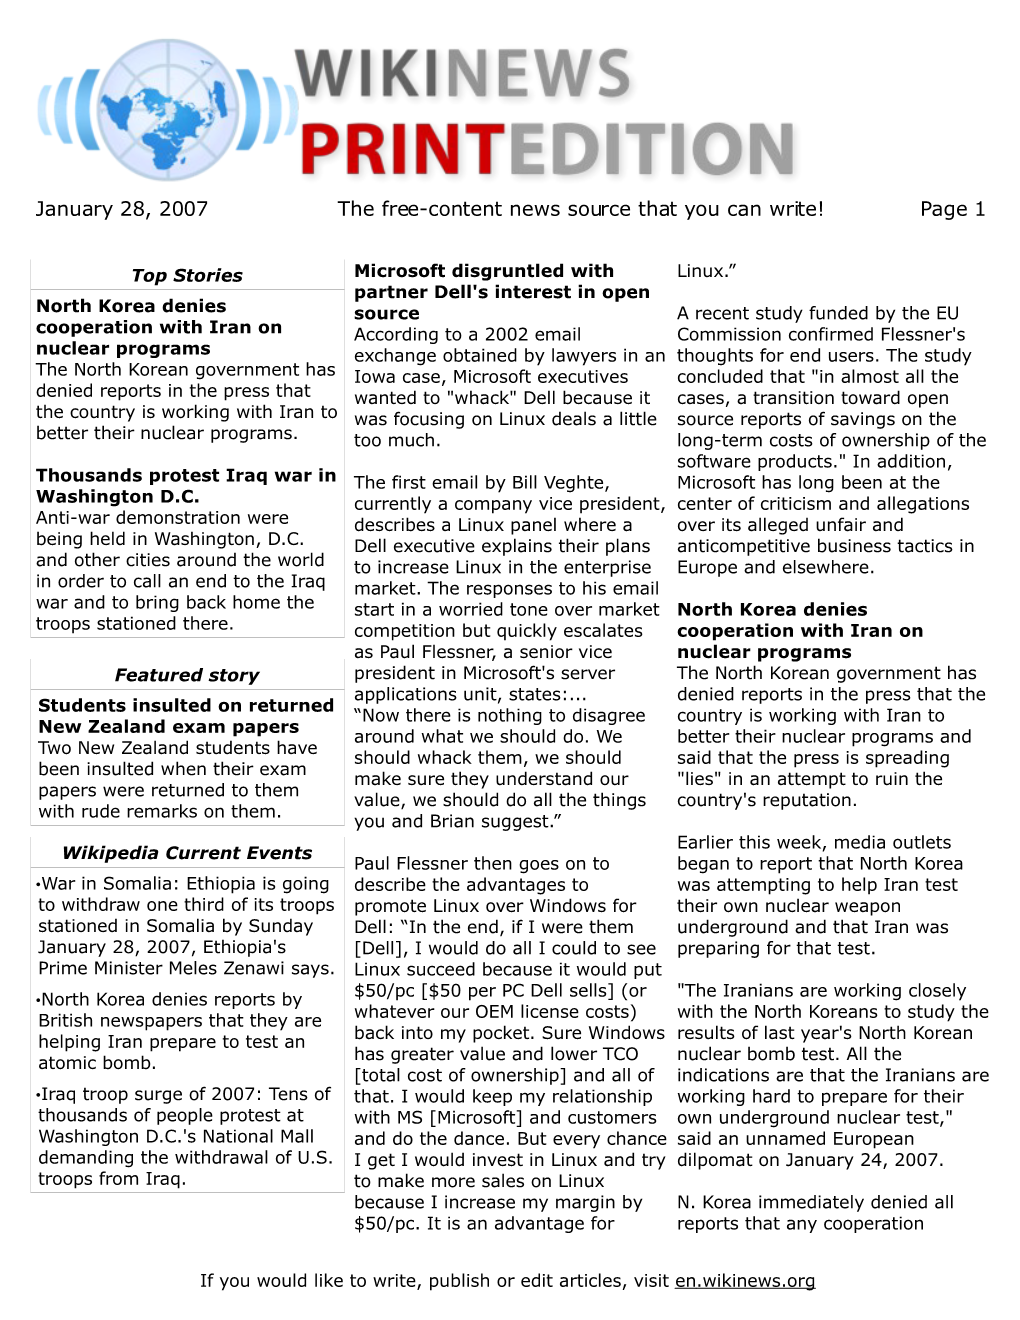 January 28, 2007 the Free-Content News Source That You Can Write! Page 1